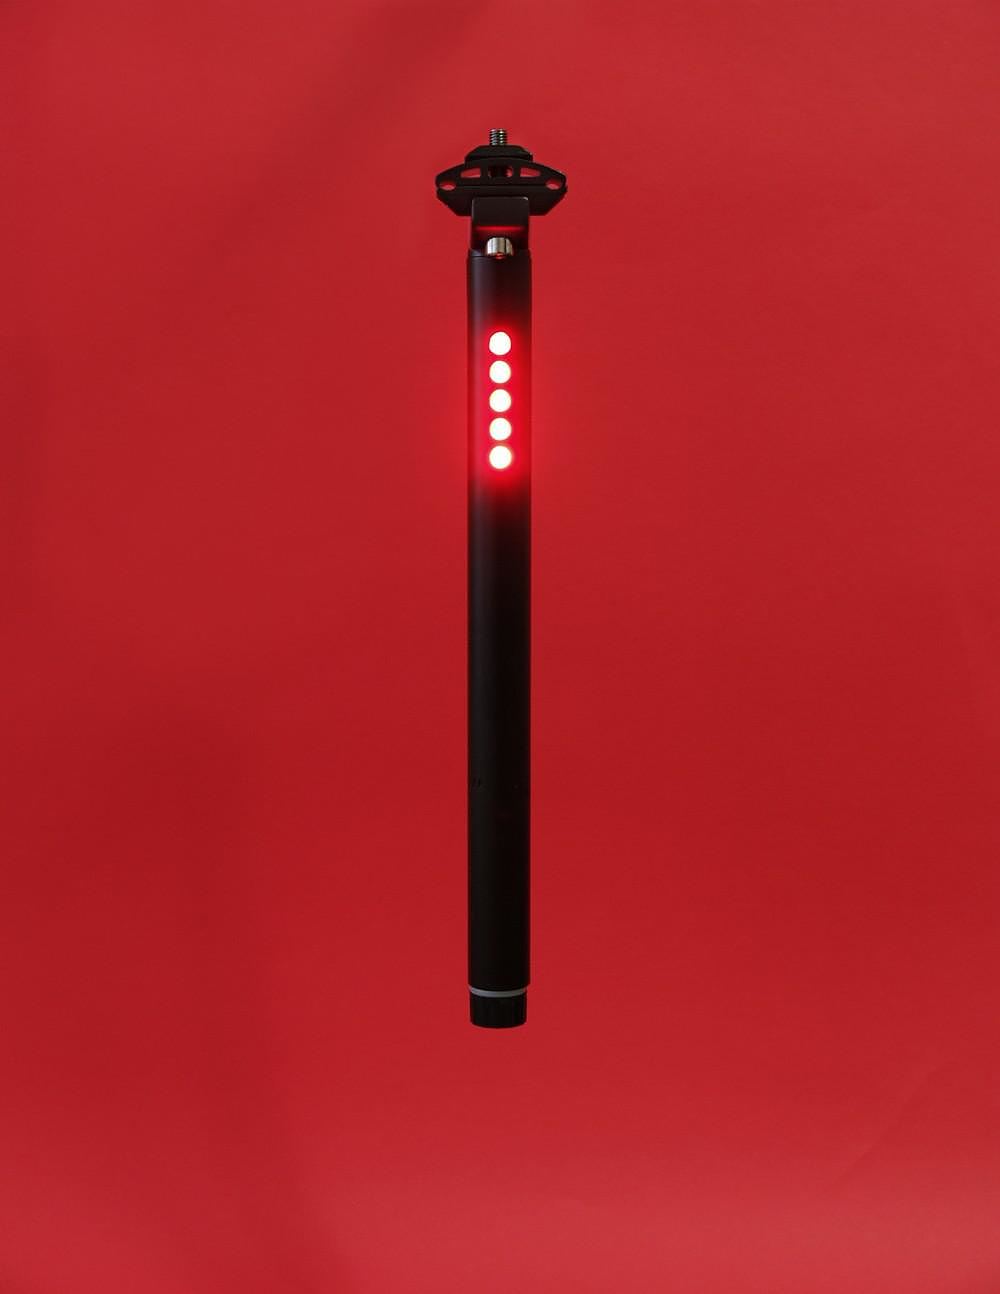 LightSKIN built-in Bicycle LED Tail Light.